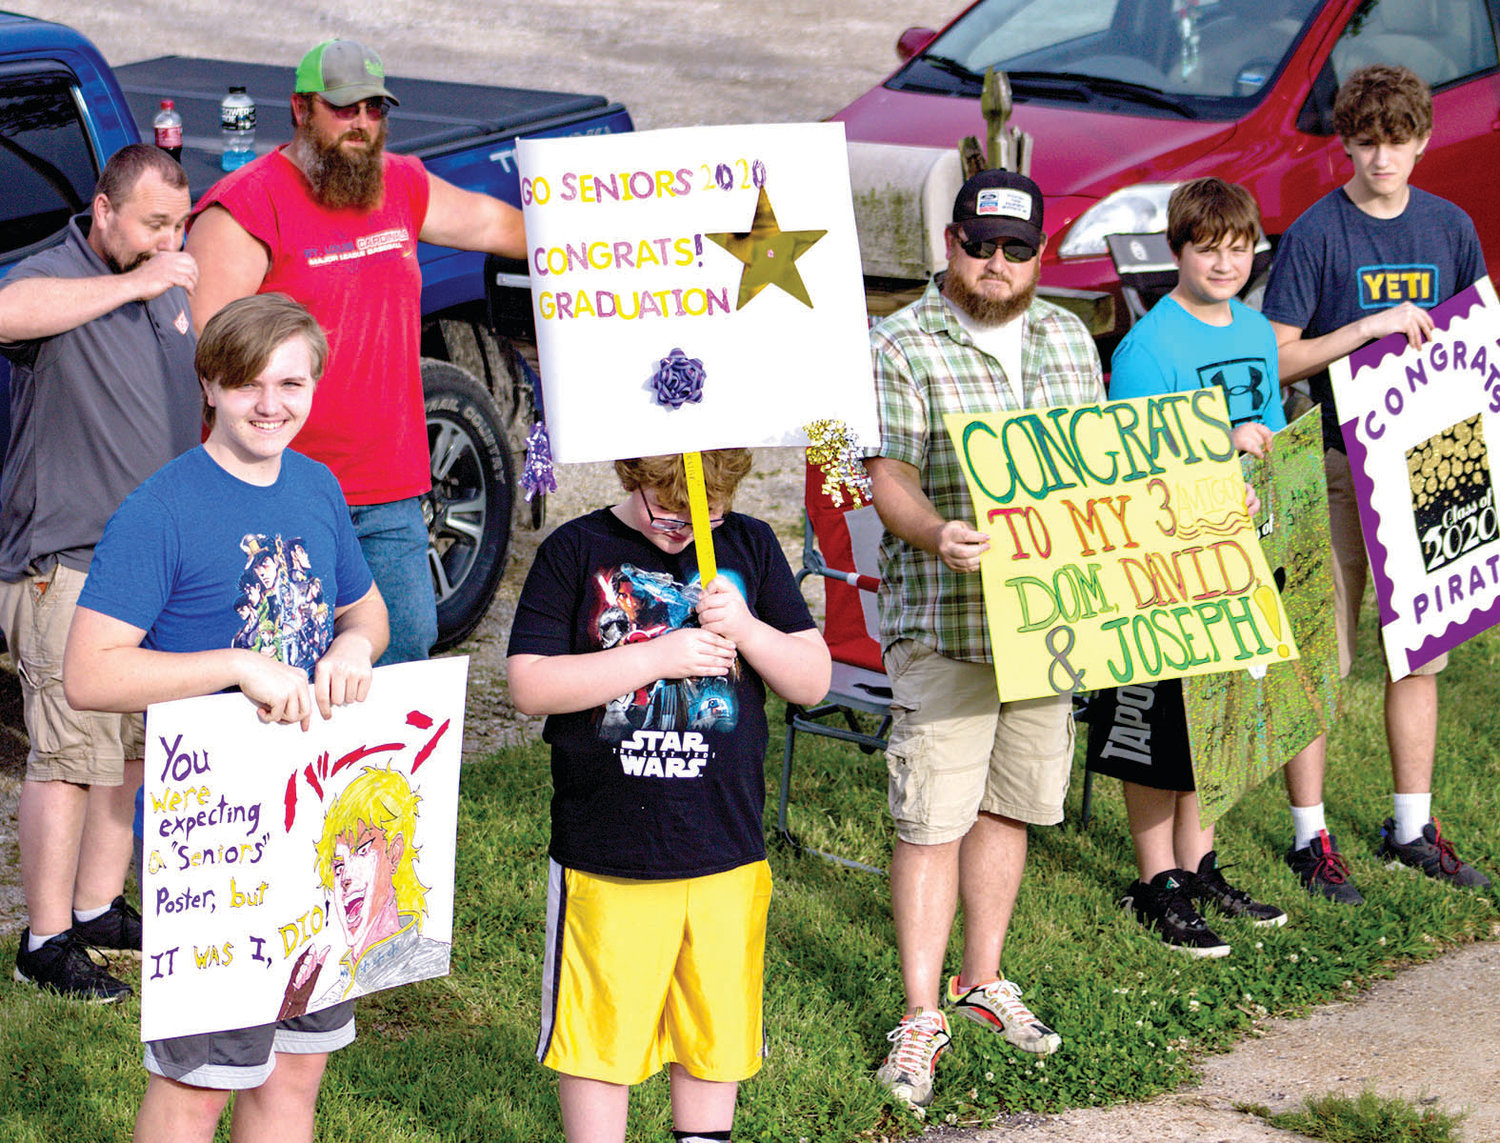 Signs and smiles were the theme as Chamois graduates took part in a parade on Friday.